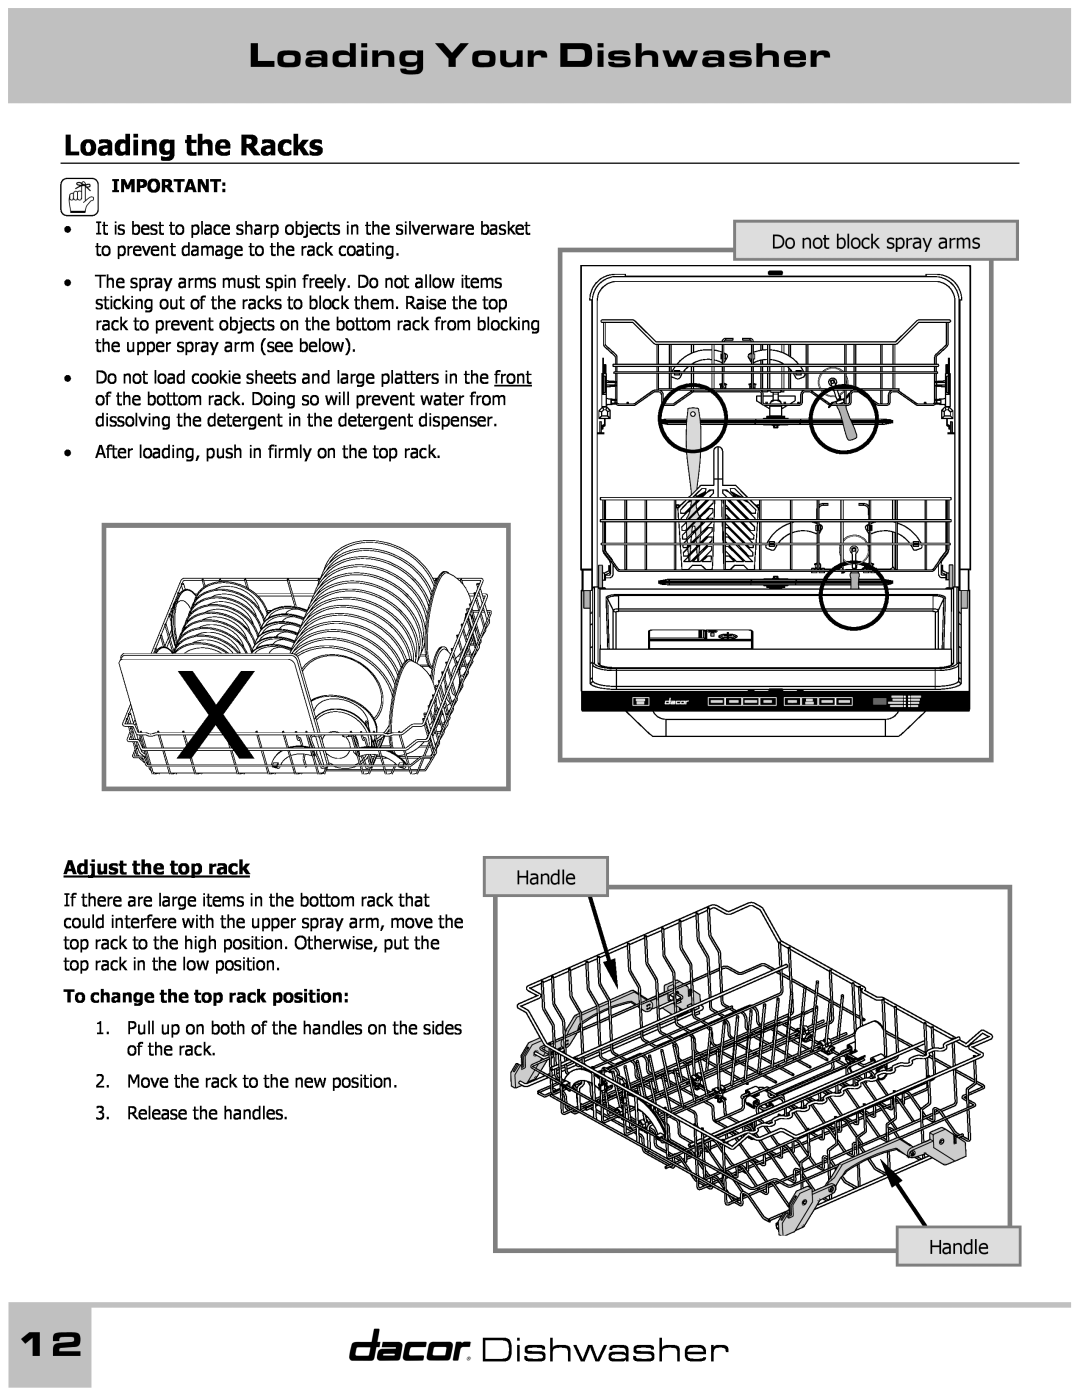 Dacor 65537 manual Loading the Racks, Do not block spray arms, Adjust the top rack, Handle, Loading Your Dishwasher 